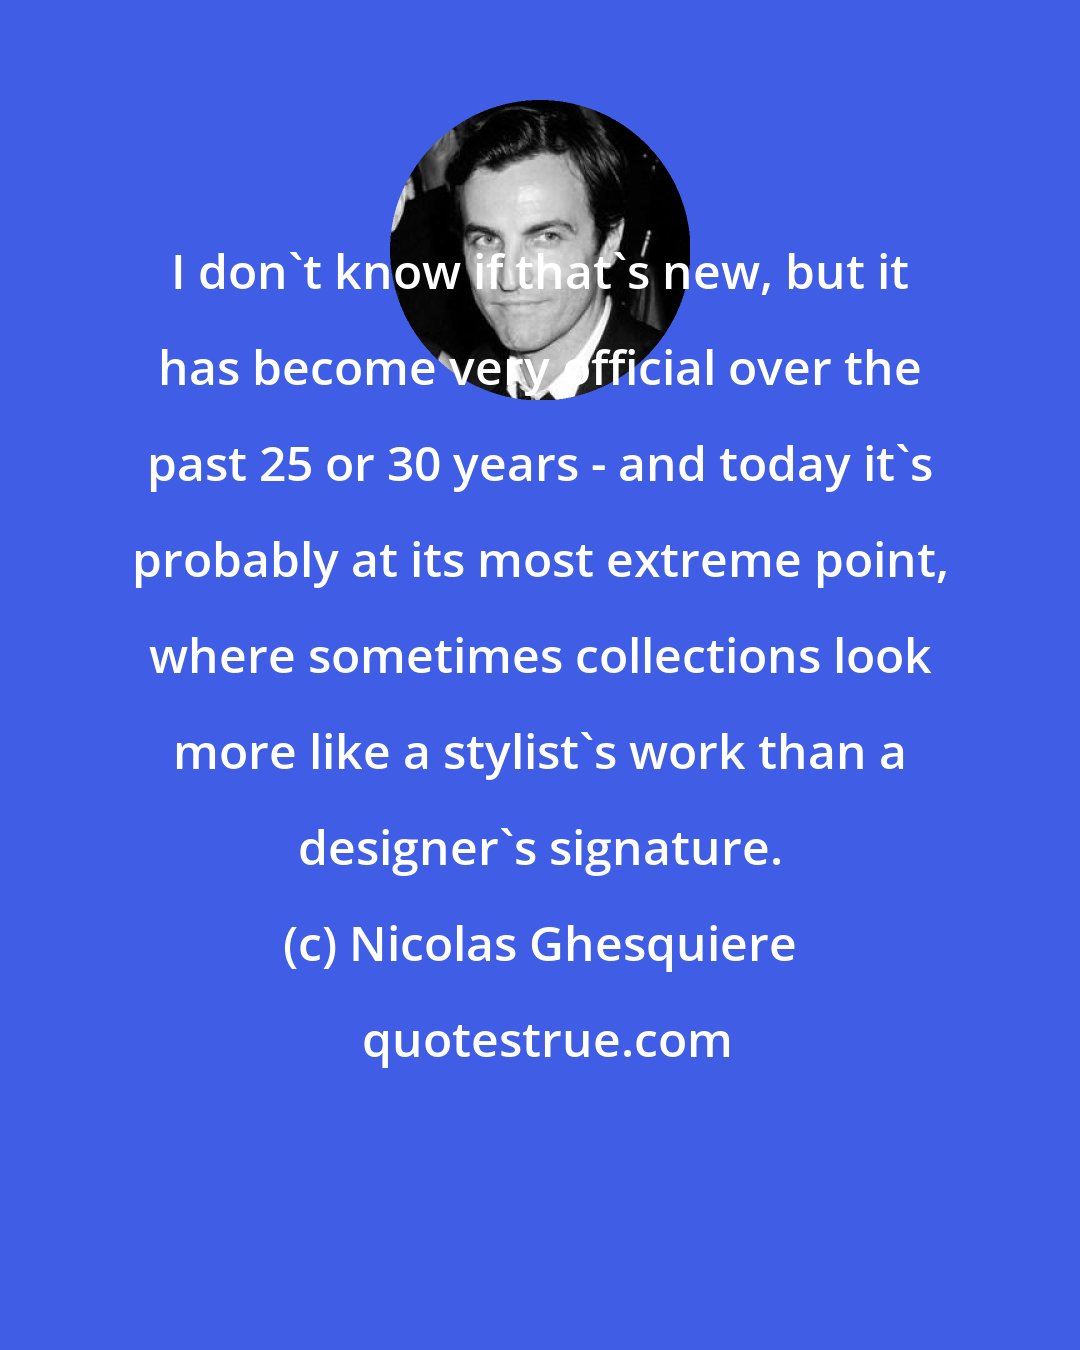 Nicolas Ghesquiere: I don't know if that's new, but it has become very official over the past 25 or 30 years - and today it's probably at its most extreme point, where sometimes collections look more like a stylist's work than a designer's signature.